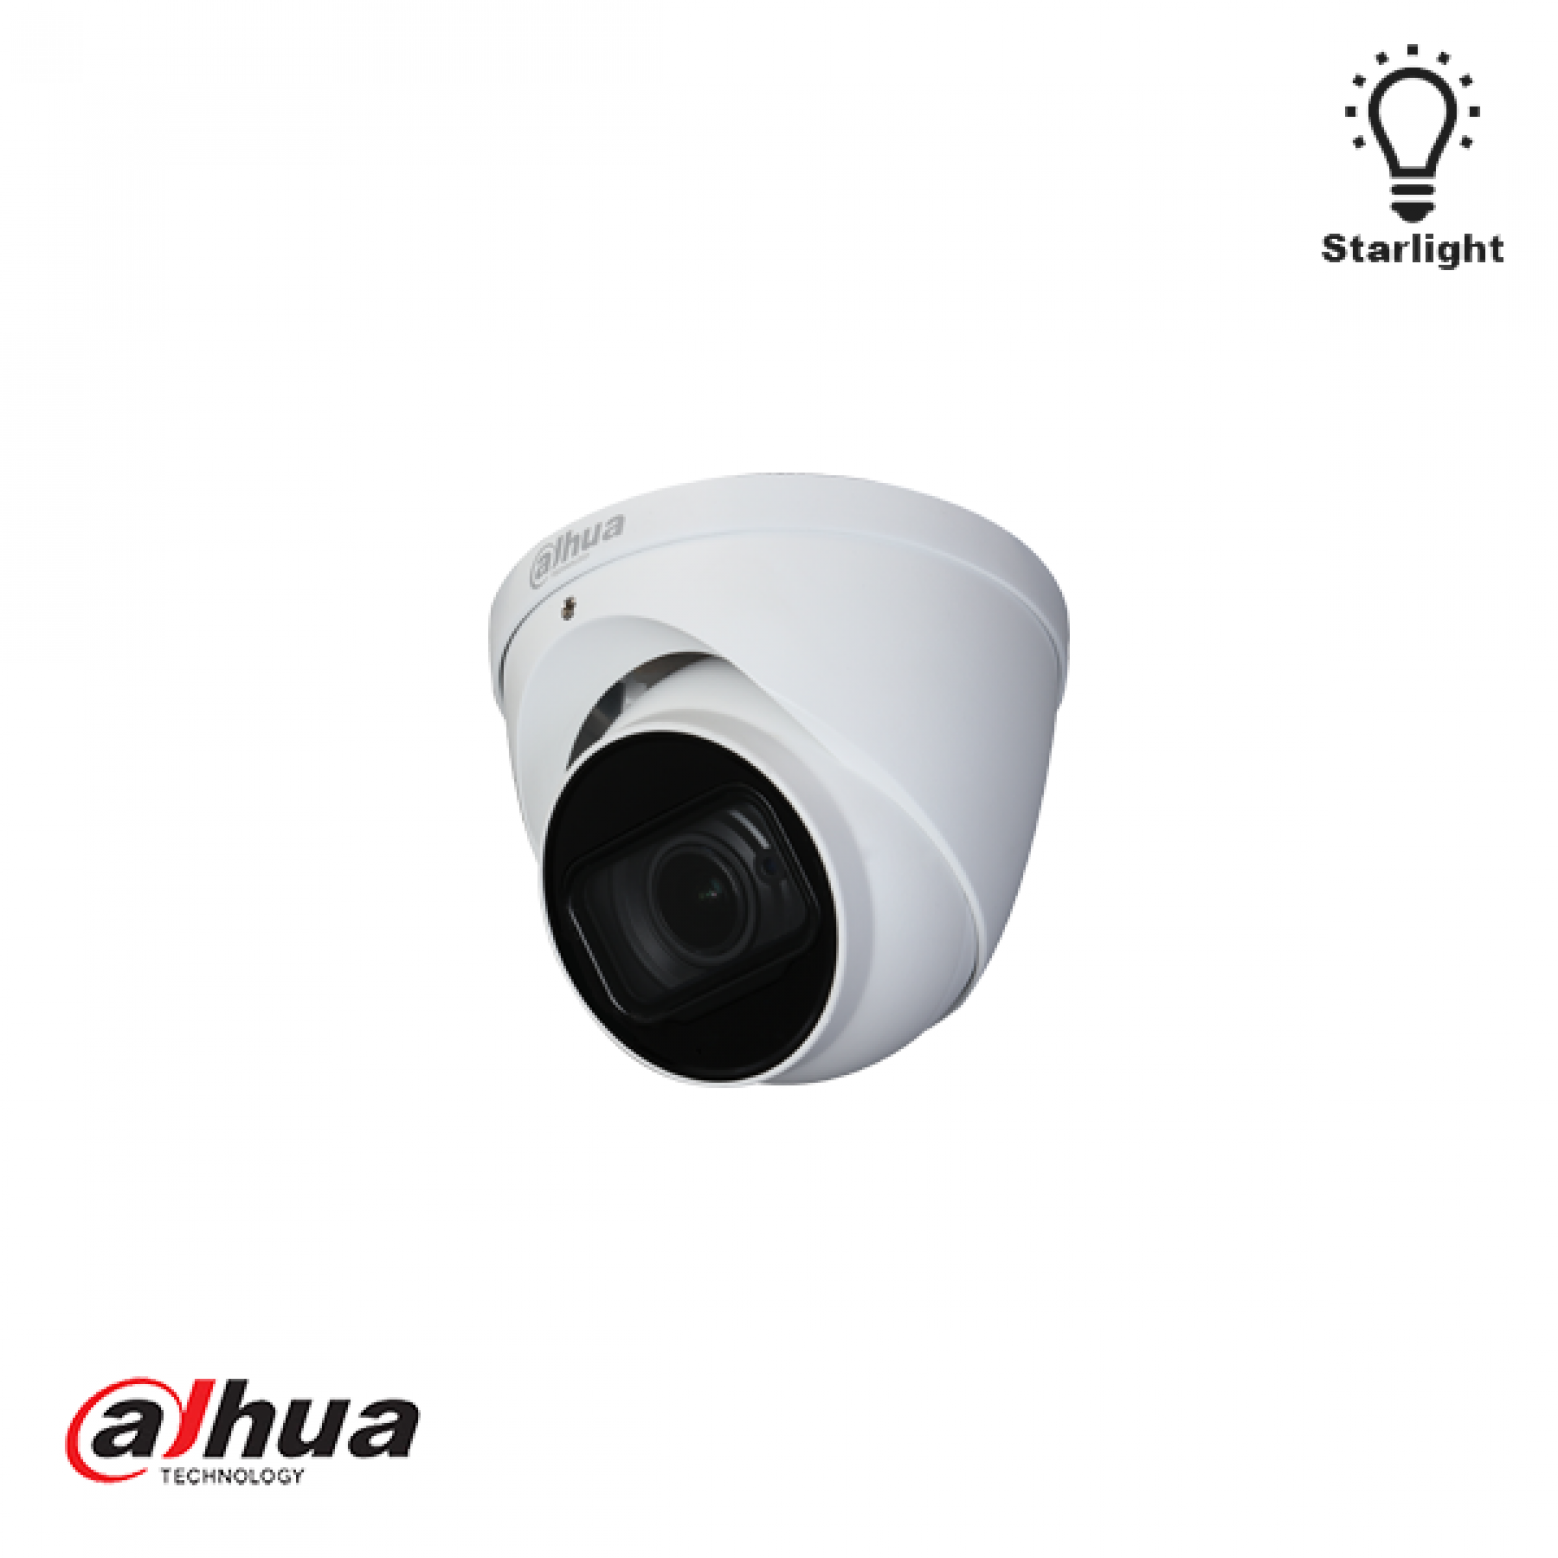 Dahua HAC-HDW2241T-A-28 starlight 1080p outdoor eyeball camera with microphone and IR